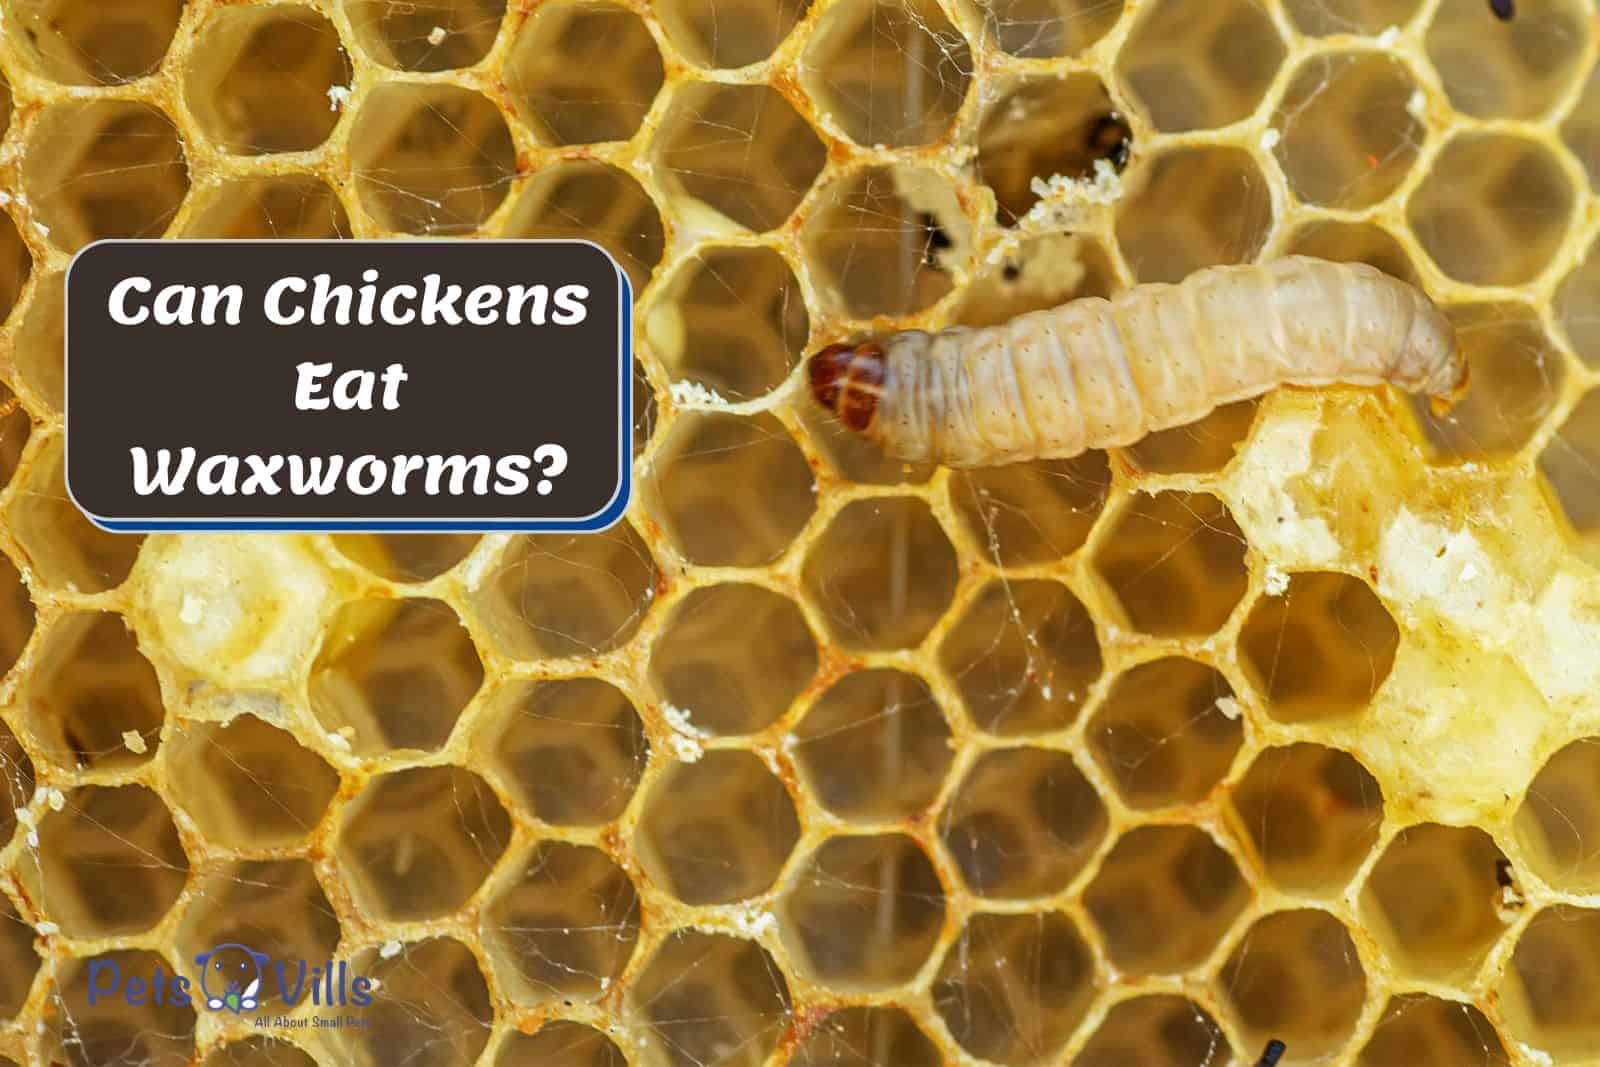 waxworm crawling on the honey comb butCan Chickens Eat Waxworms?